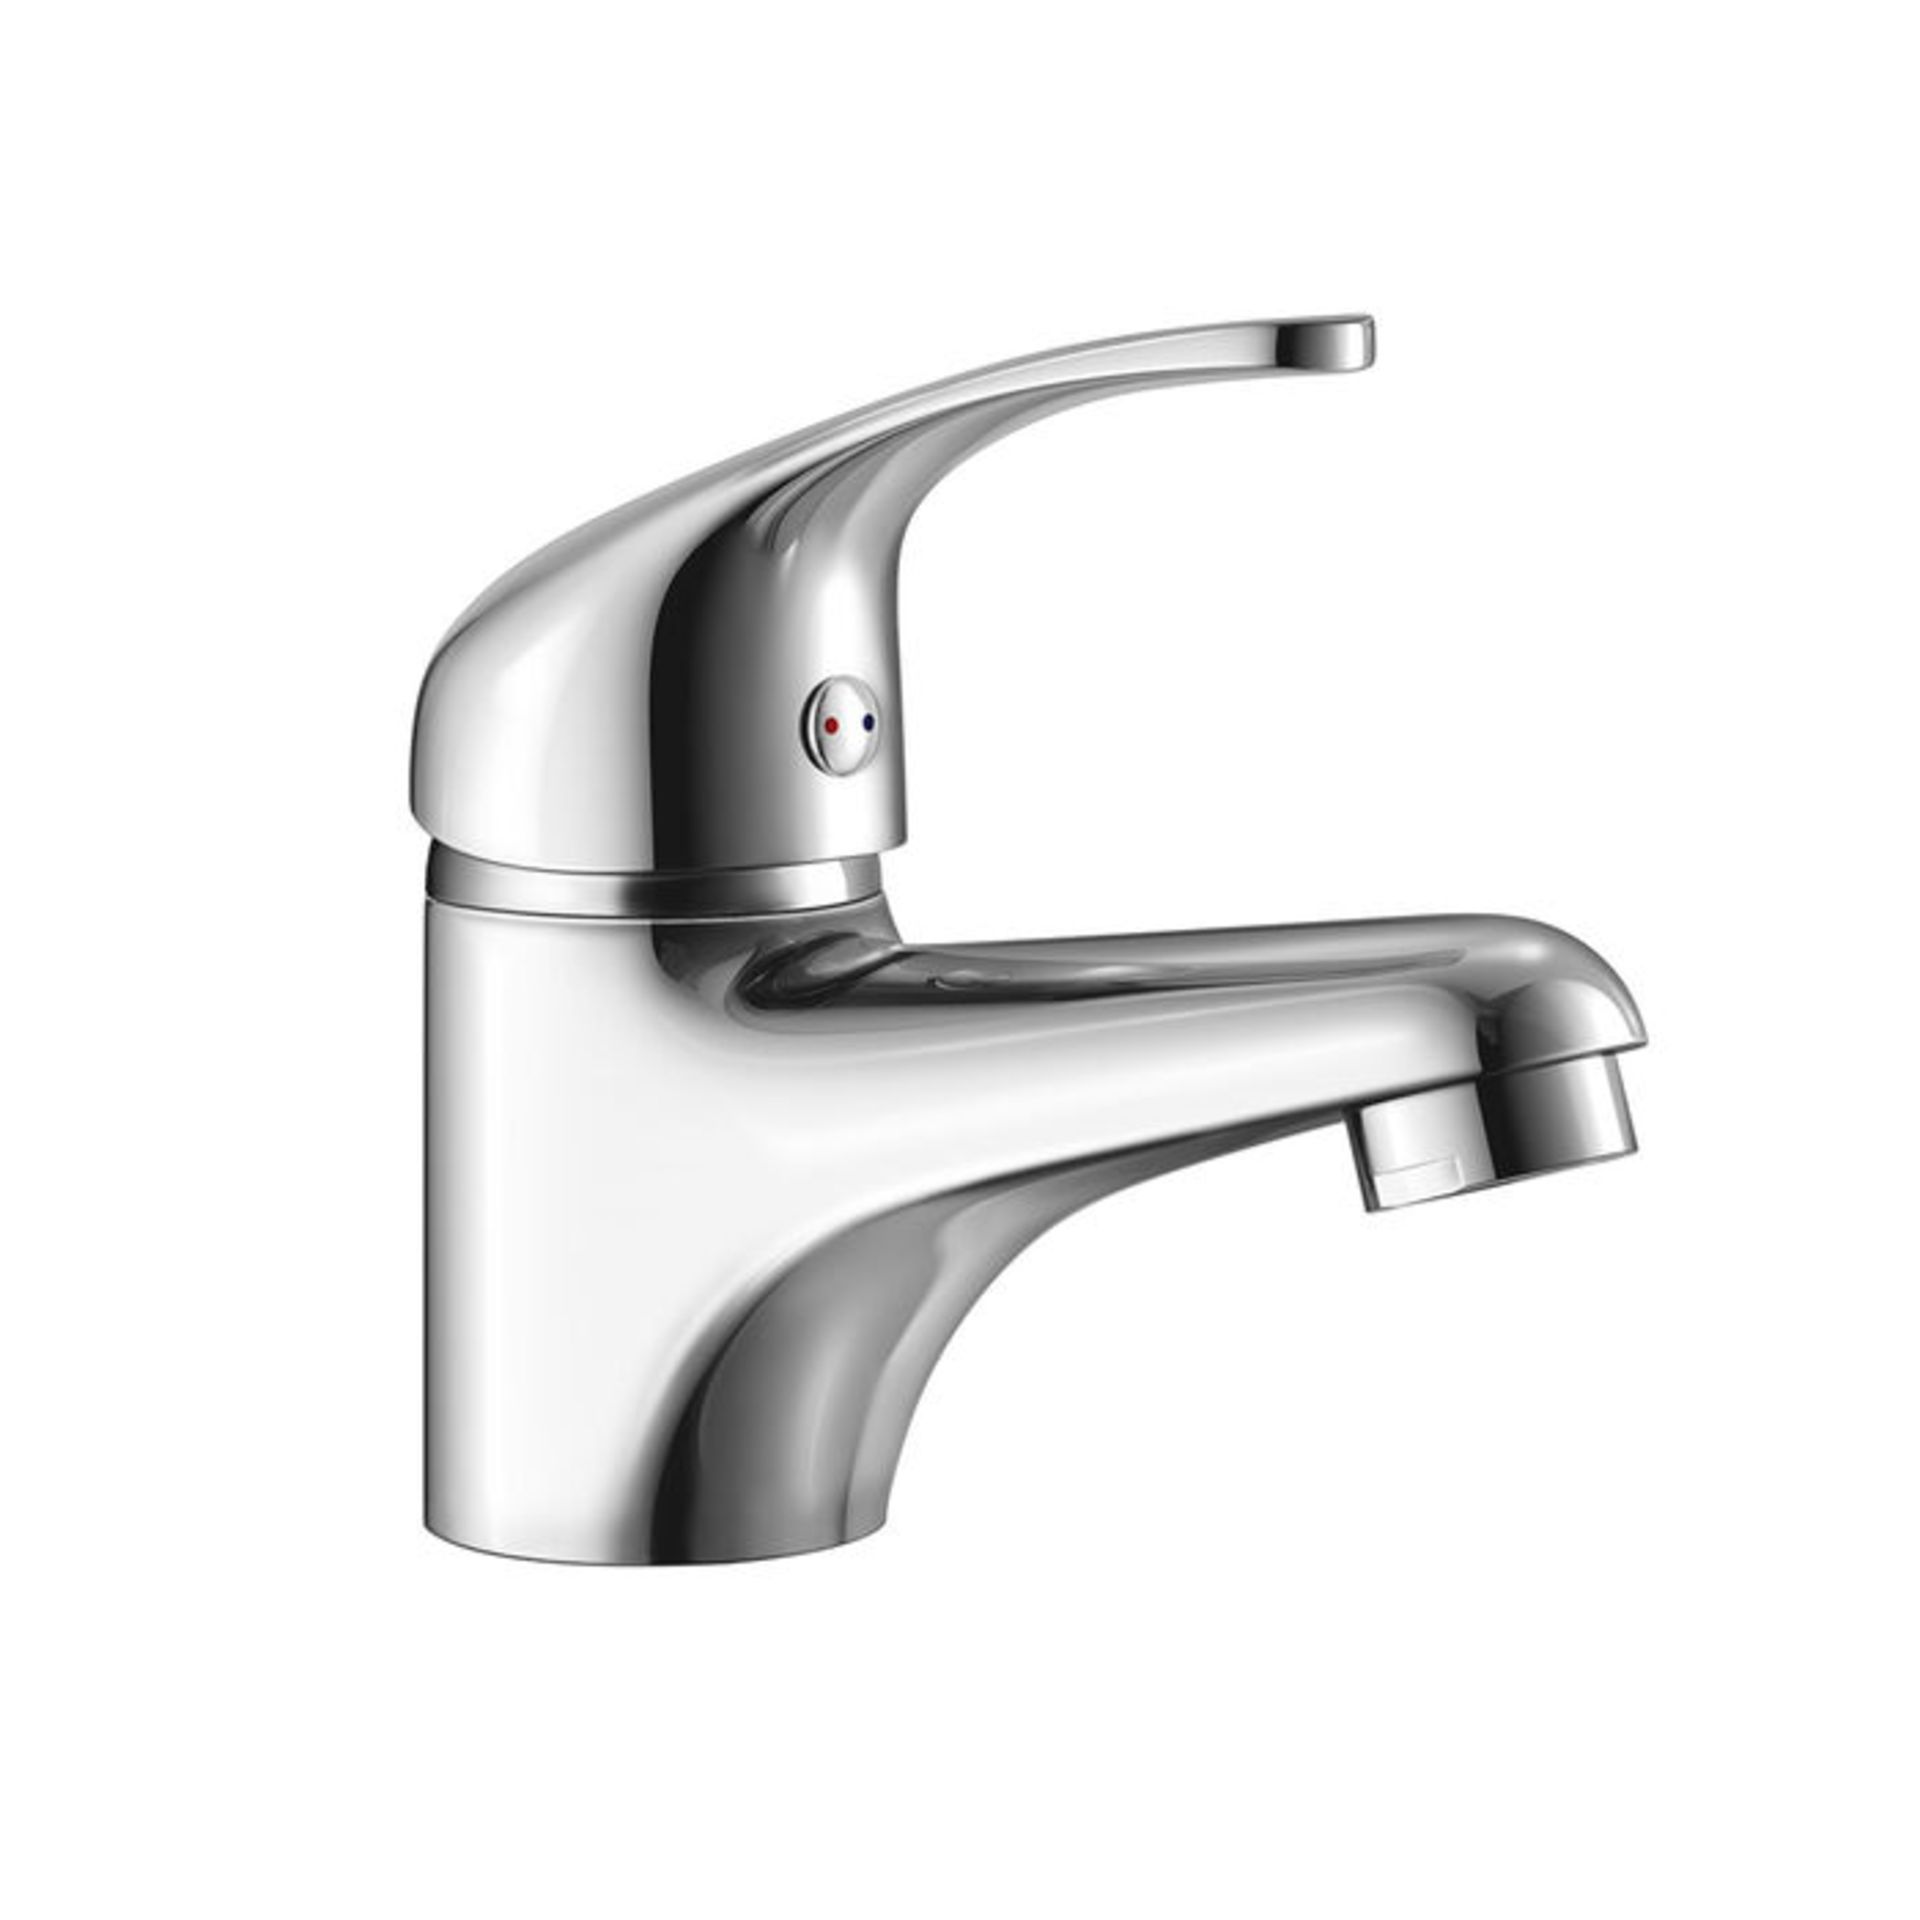 (RK1033) Sleek Sink Mixer Tap. Engineered from solid brass which is layered in a chrome finish ...